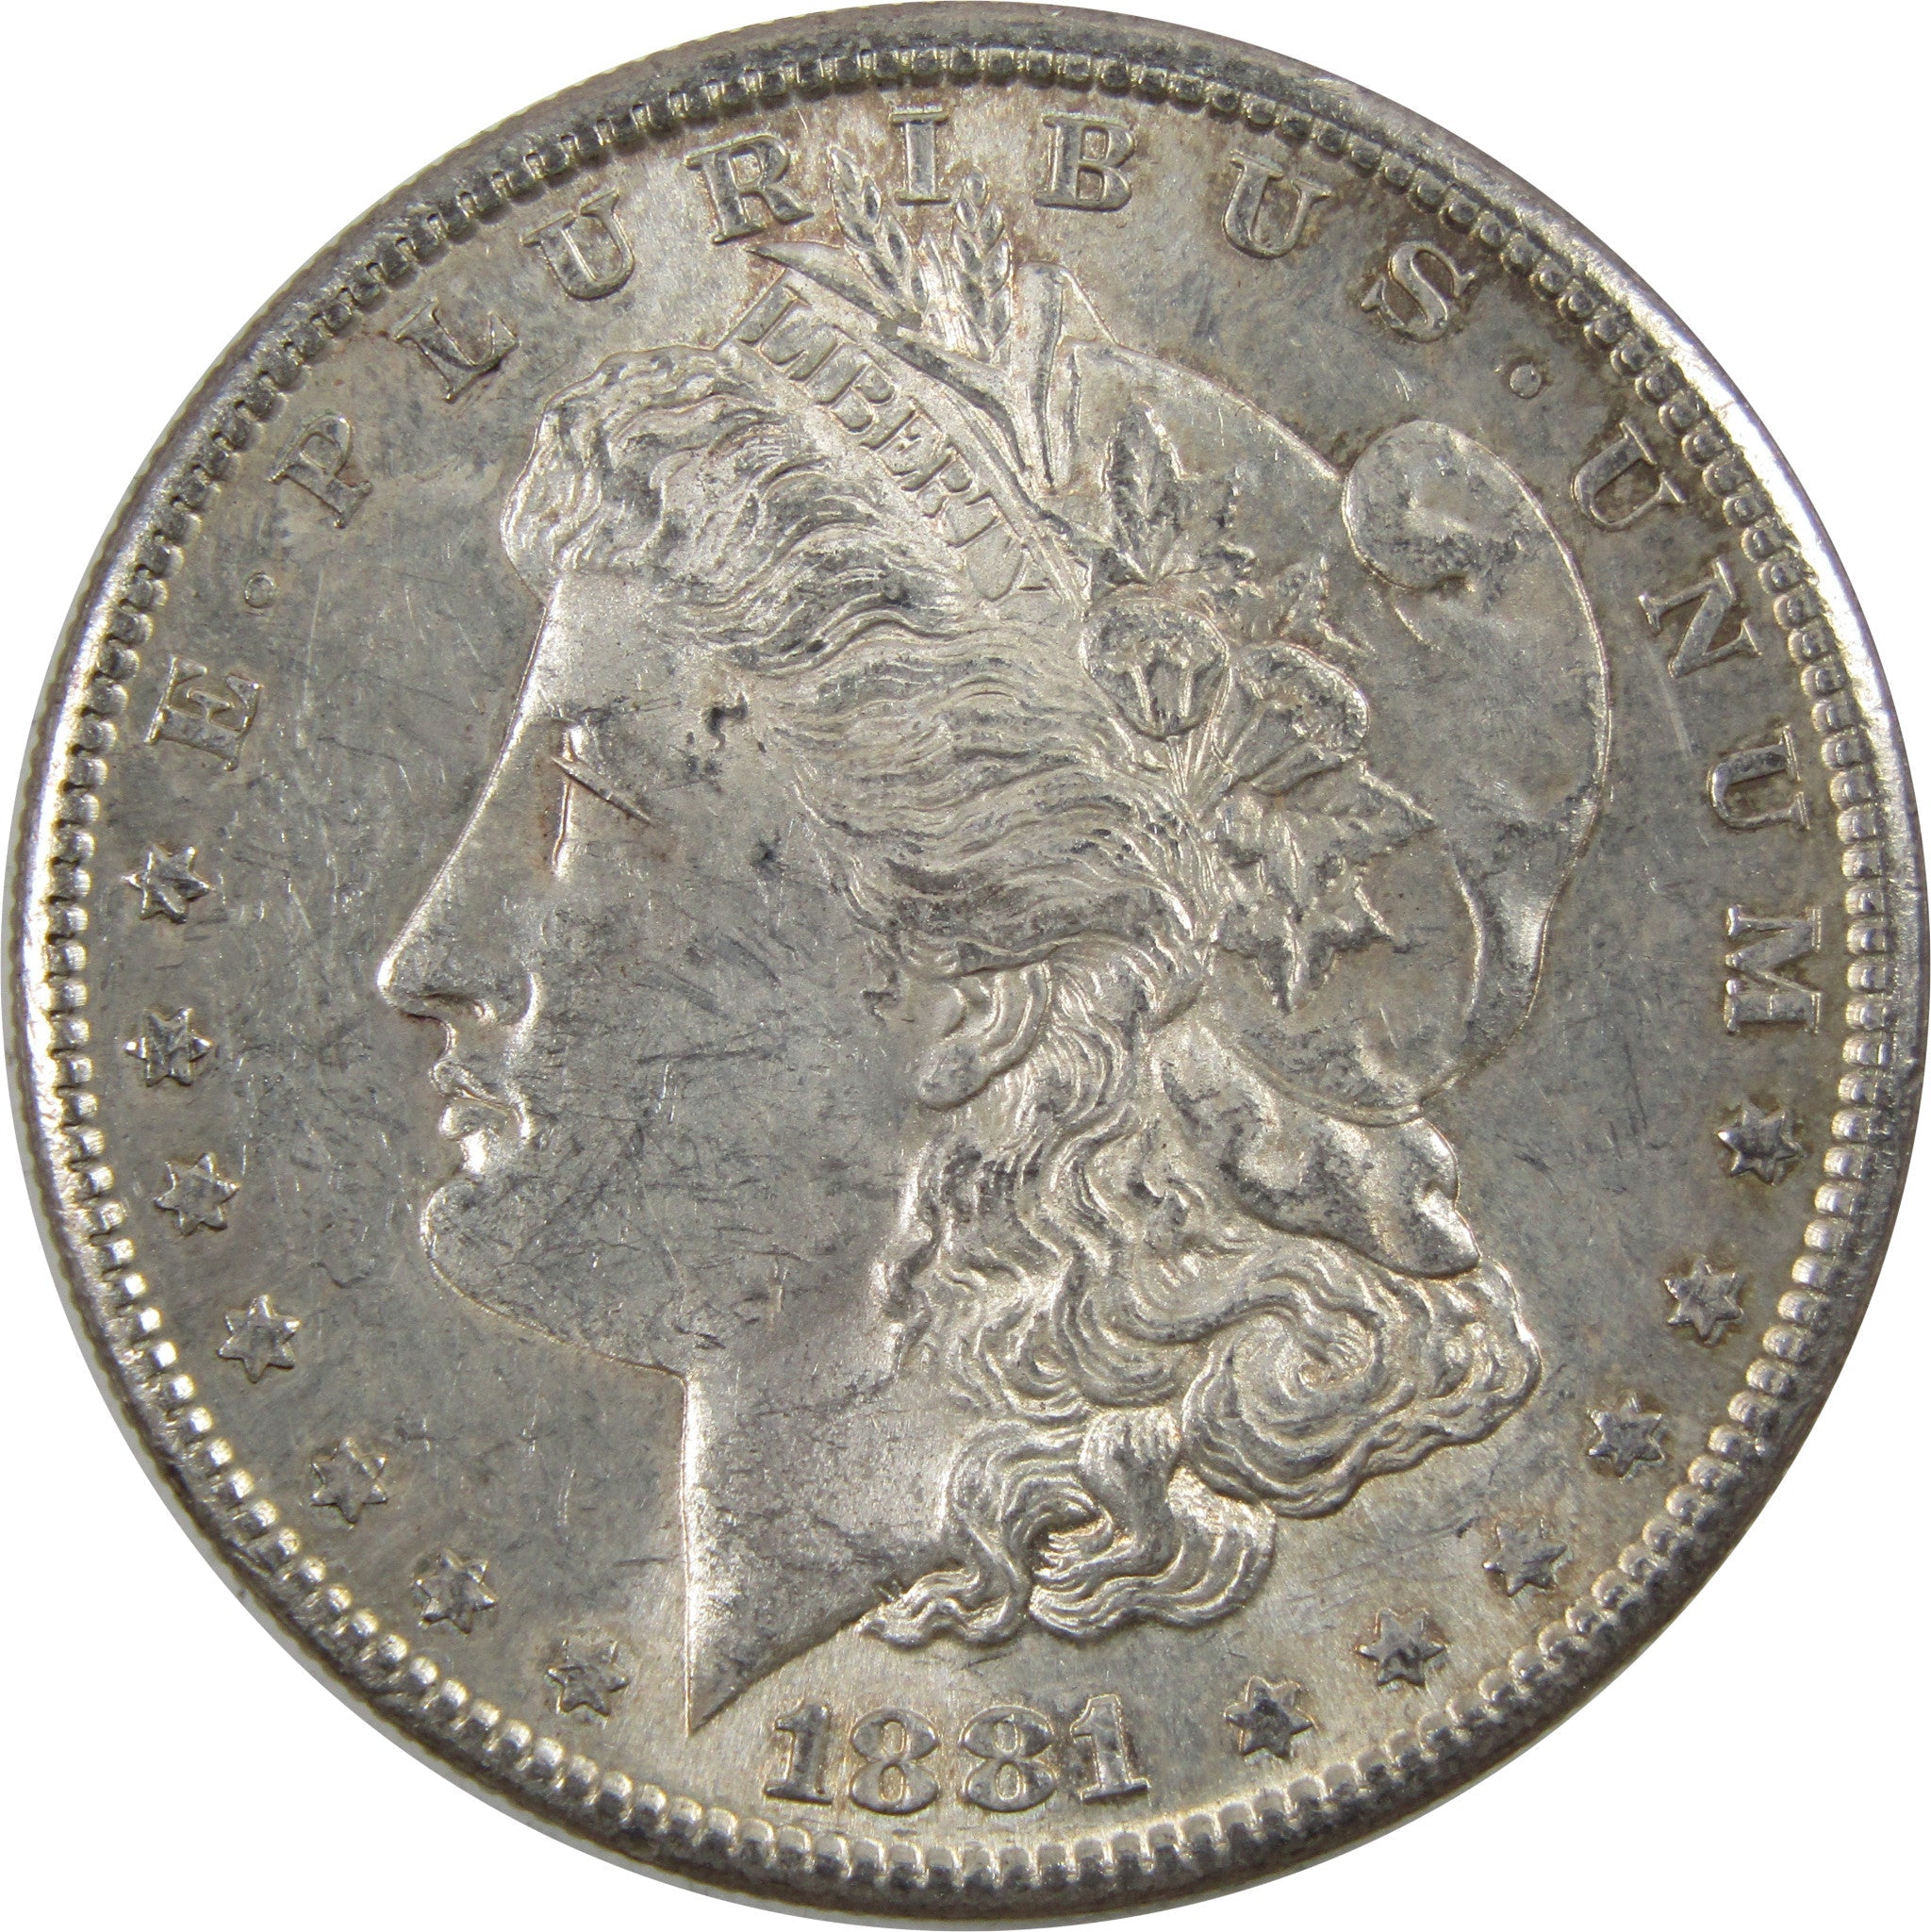 1881 S Morgan Dollar AU About Uncirculated 90% Silver $1 SKU:I5470 - Morgan coin - Morgan silver dollar - Morgan silver dollar for sale - Profile Coins &amp; Collectibles